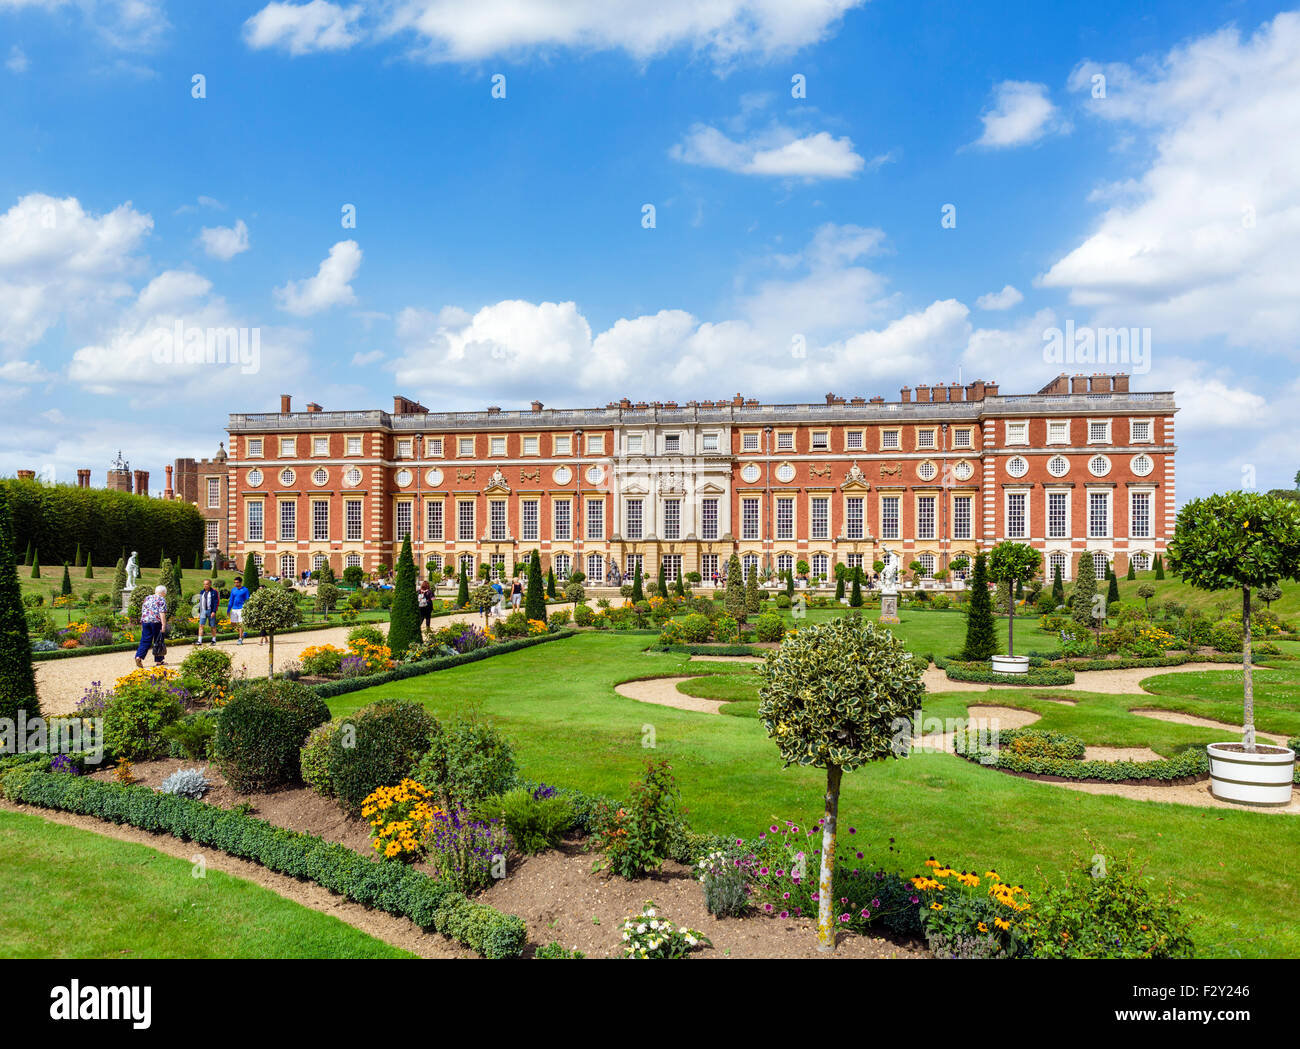 The South Front, by Sir Christopher Wren, viewed from the Privy Garden, Hampton Court Palace, Greater London, England, UK Stock Photo